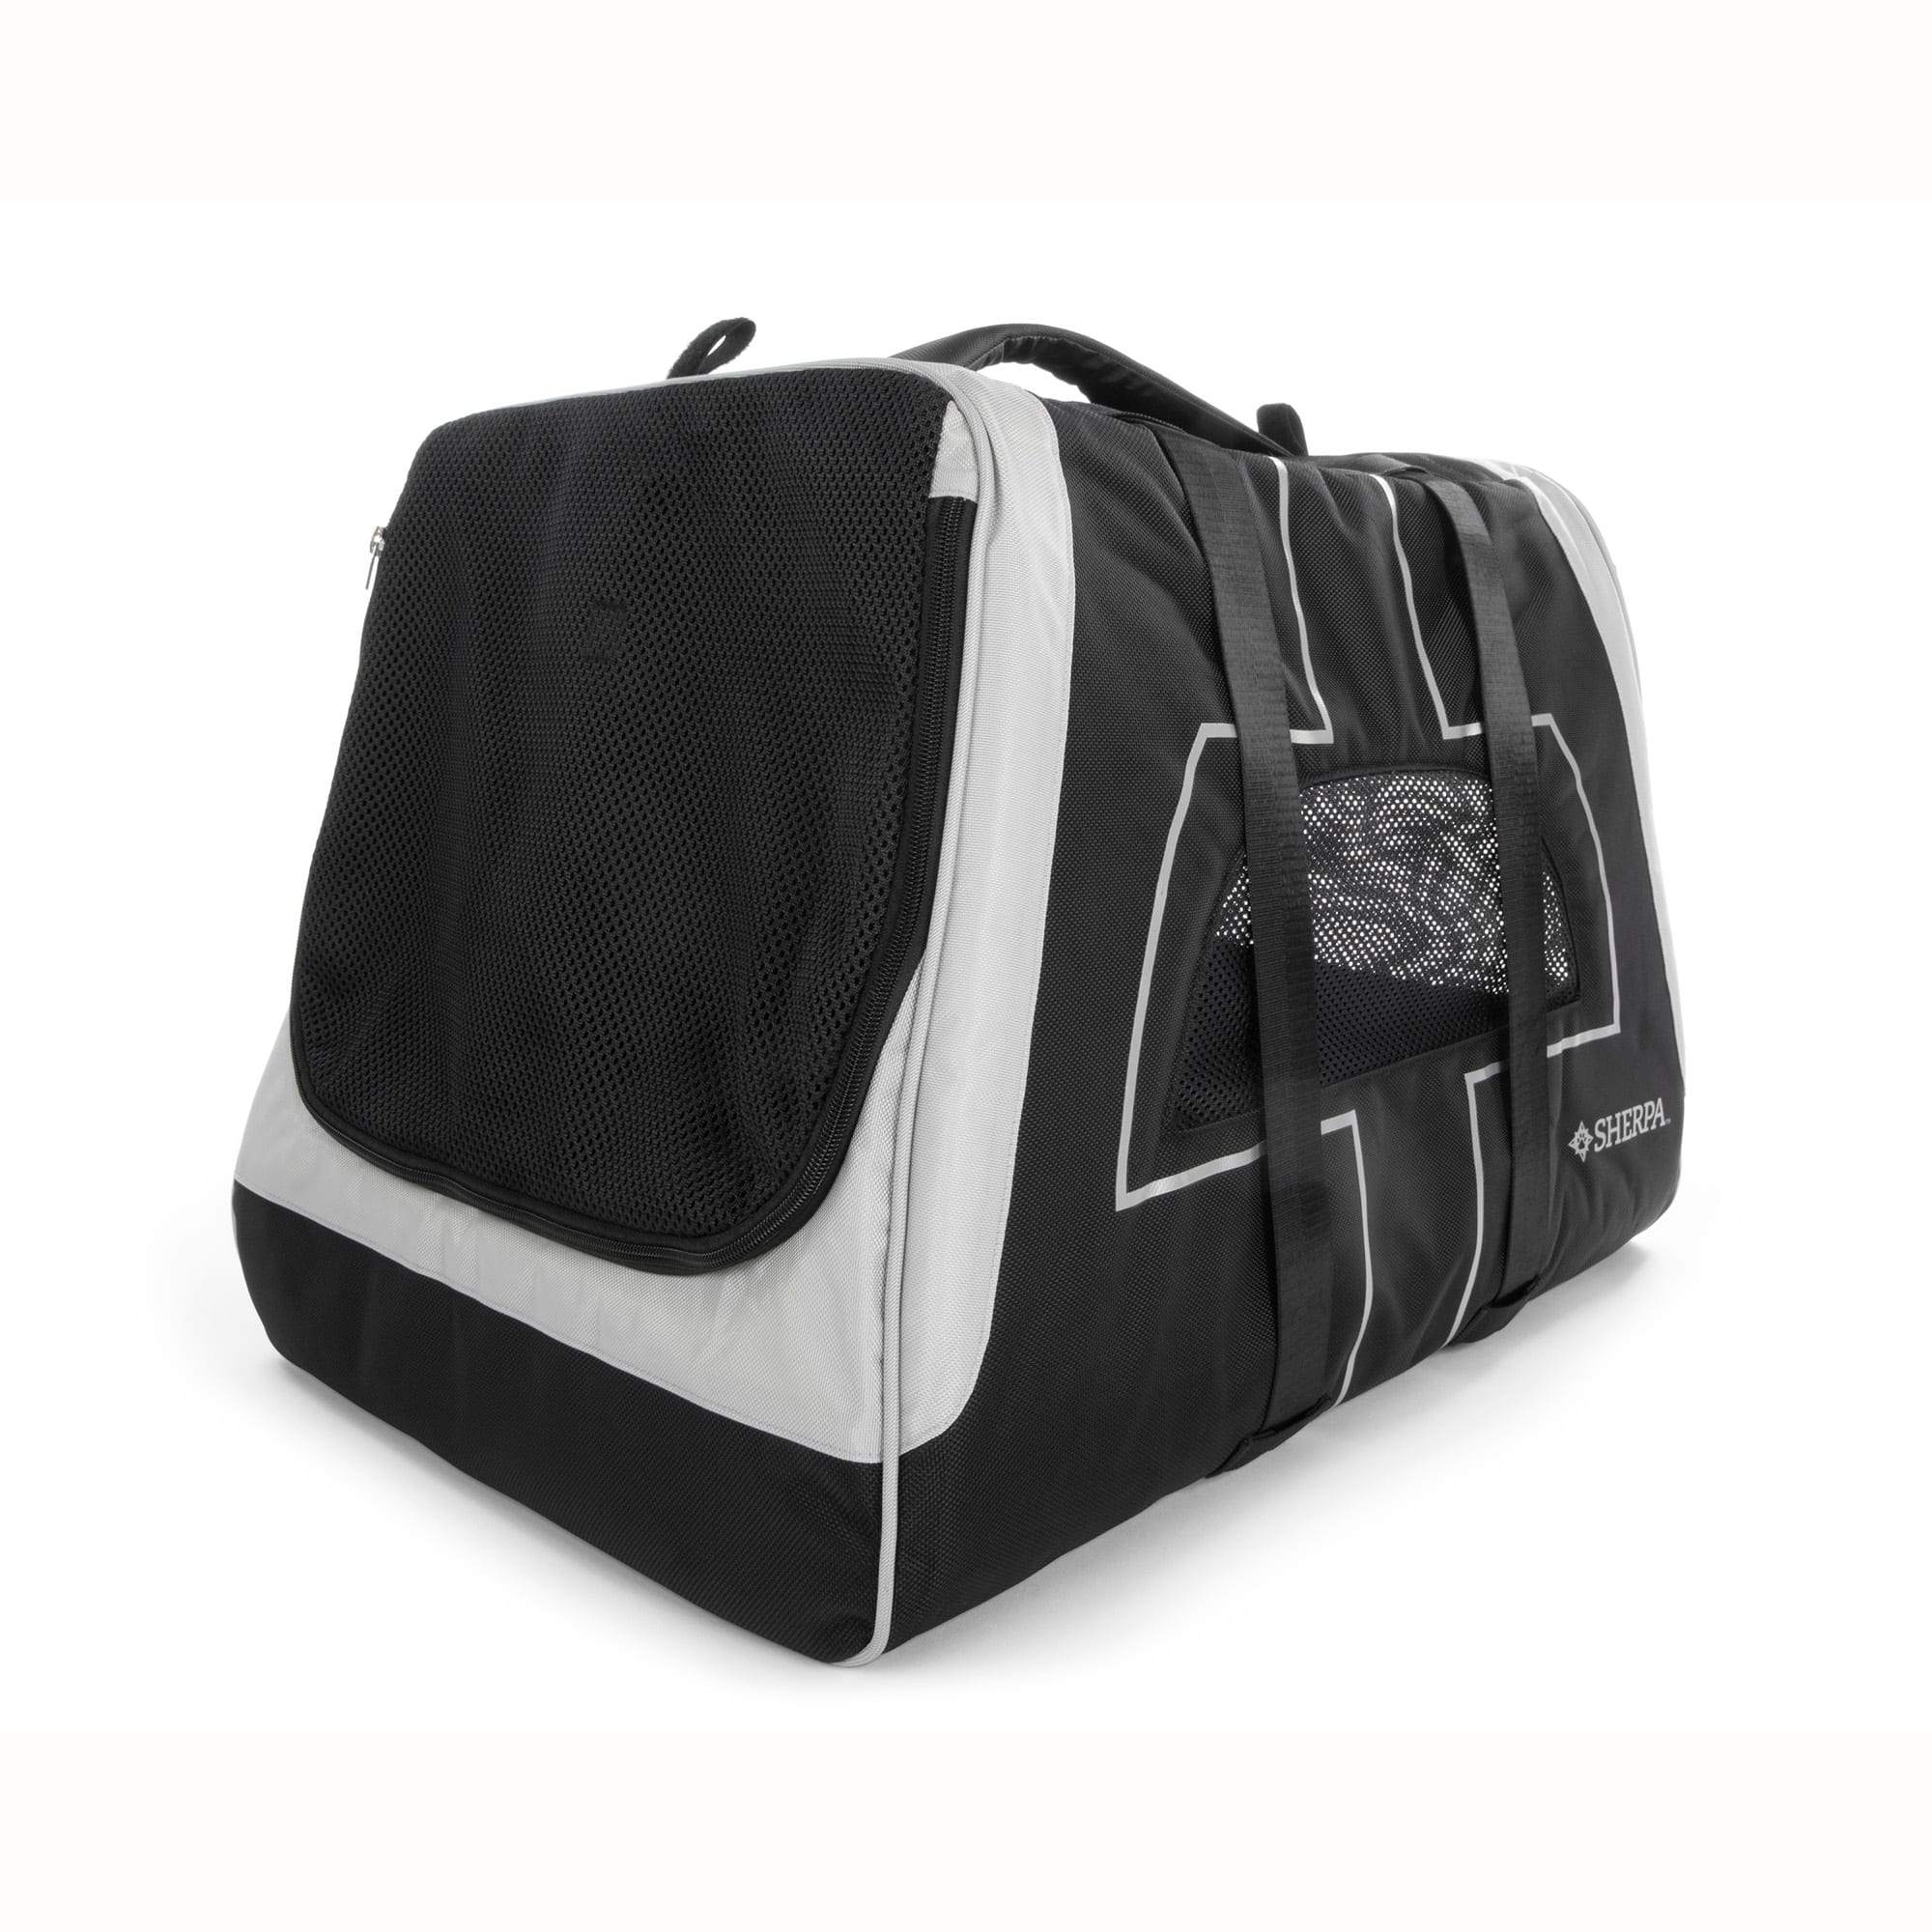 Louis Vuitton Dog Carrier - This one is perfect for traveling and airline  approved!